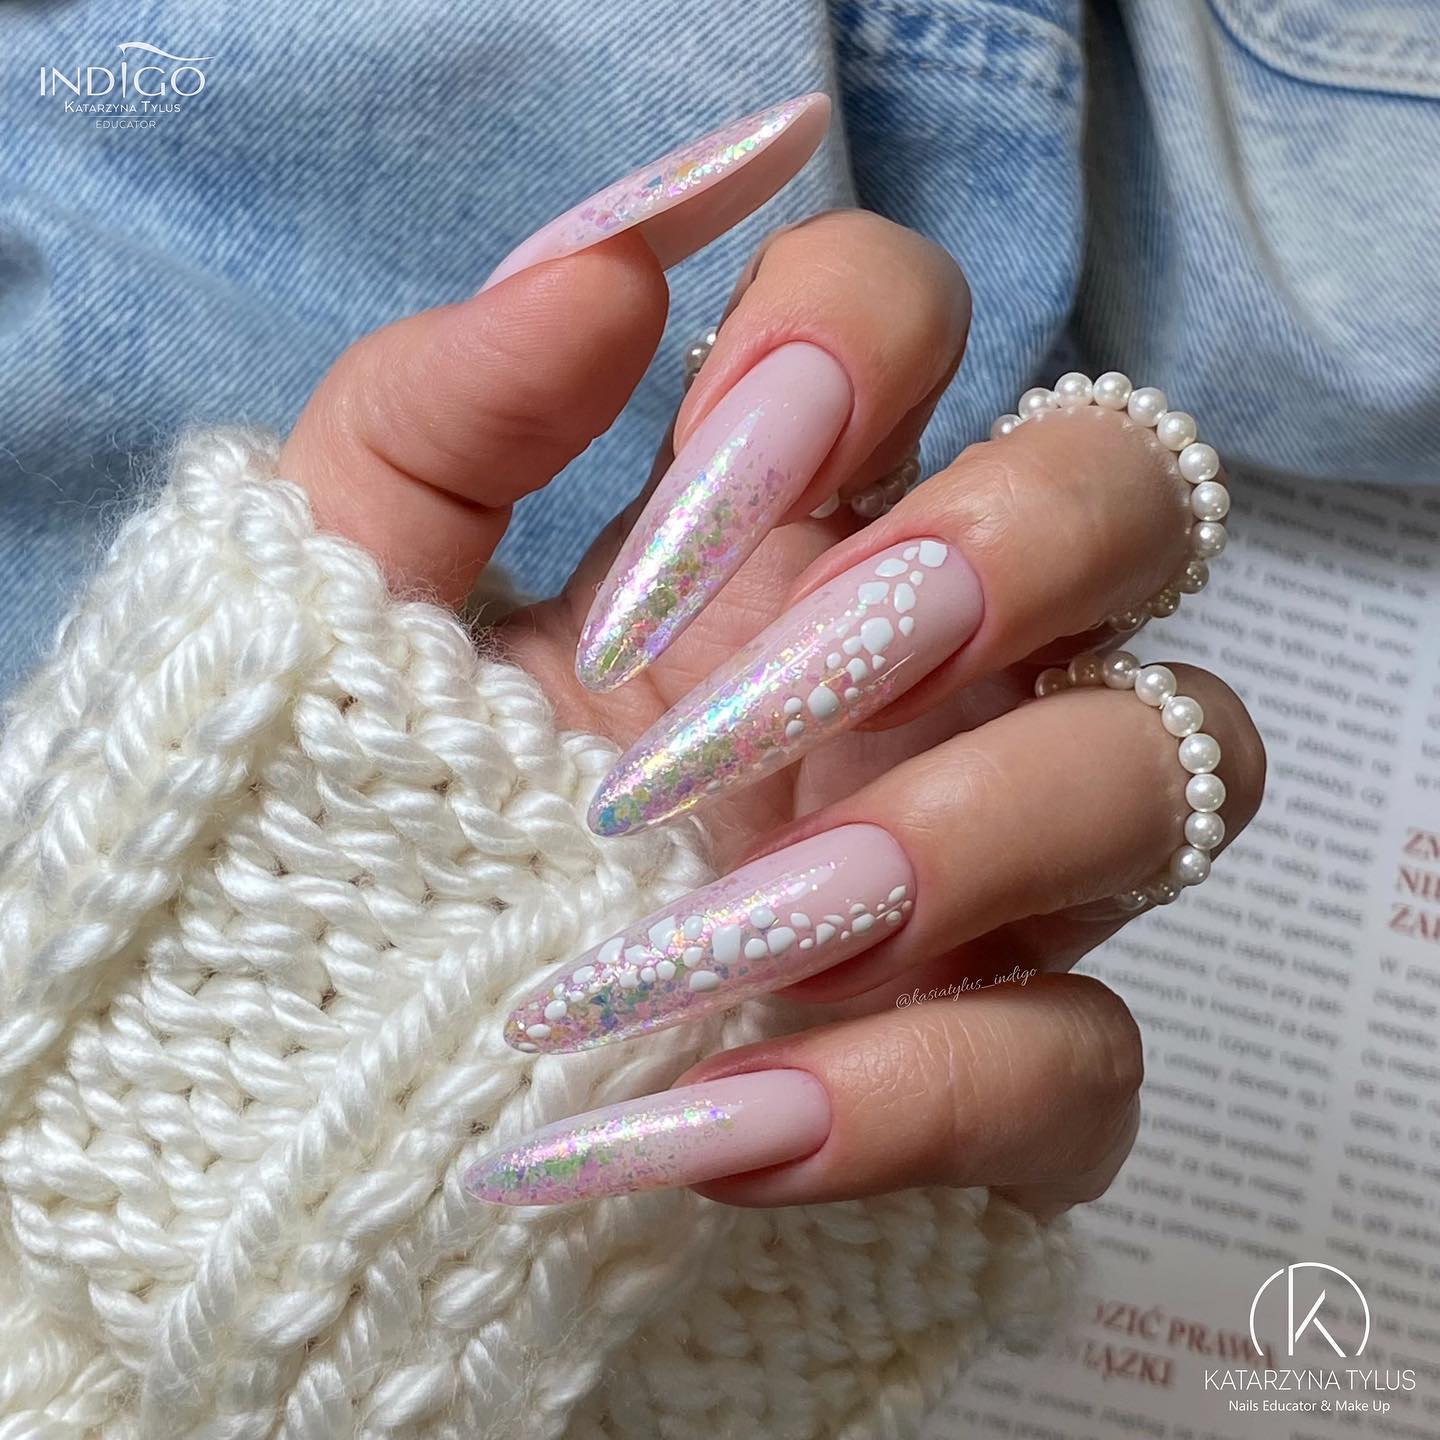 Long Pointy Pink Nails with White Dots